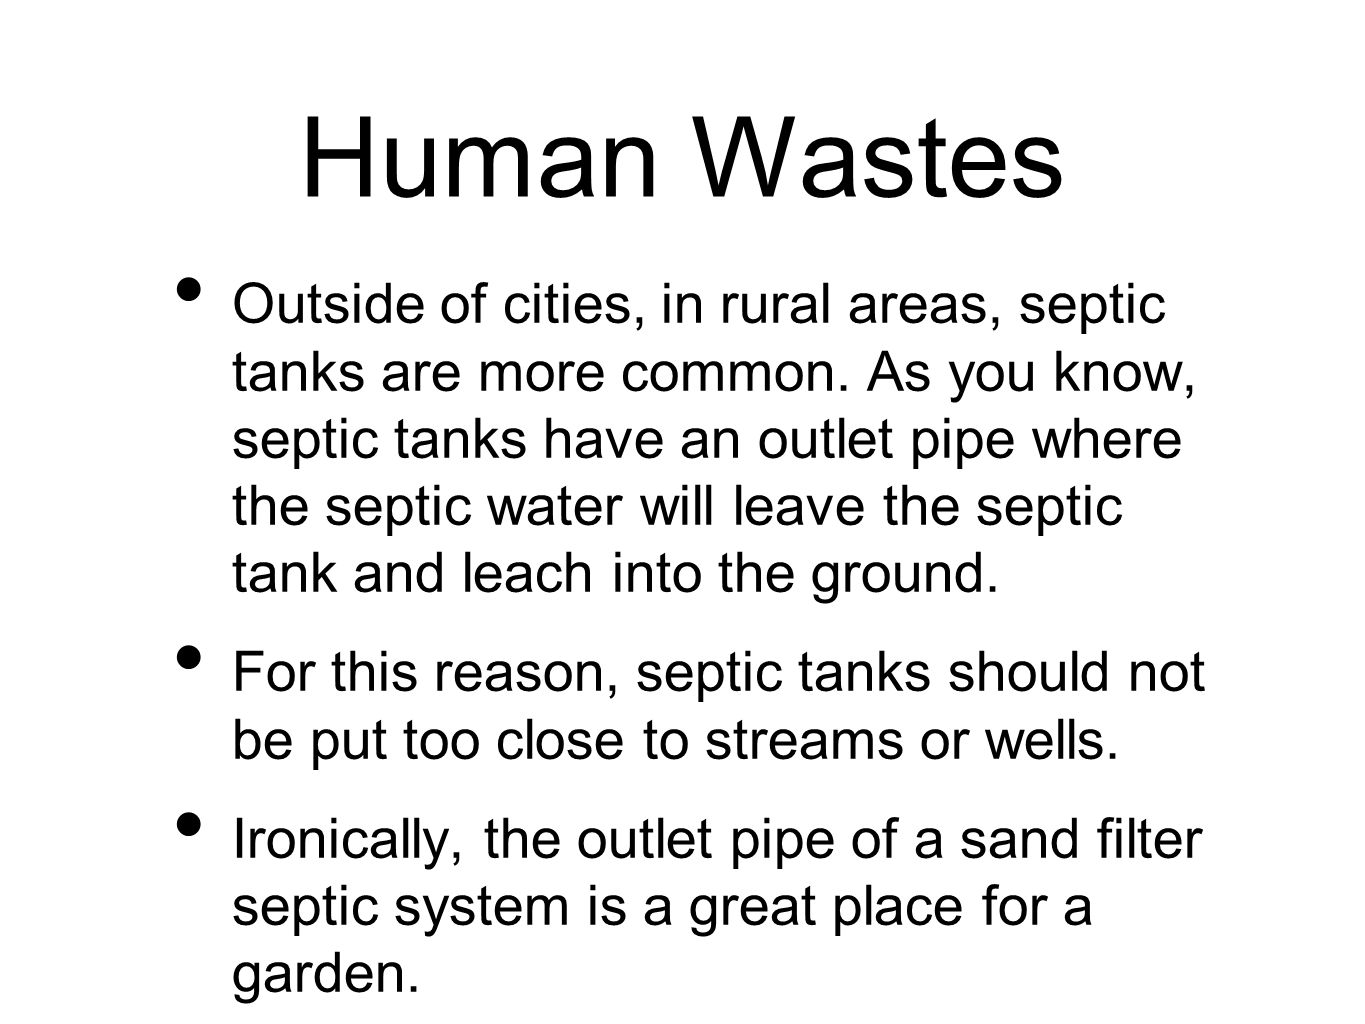 Human Wastes Outside of cities, in rural areas, septic tanks are more common.